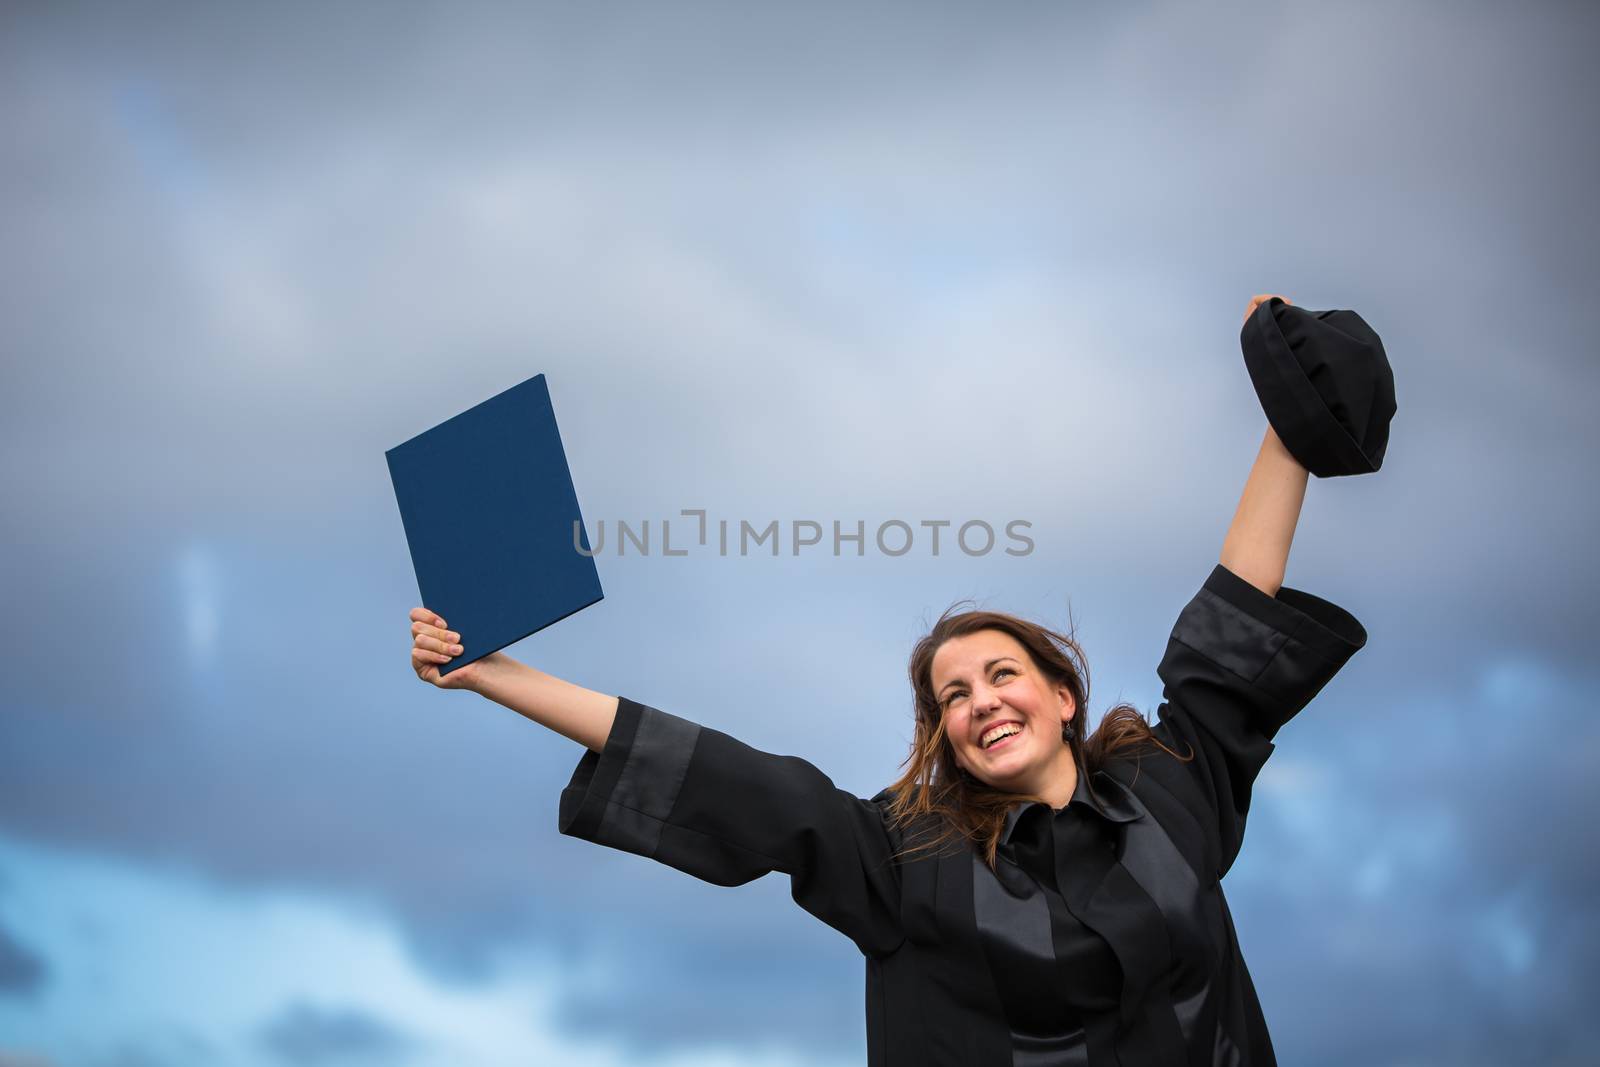 Pretty, young woman celebrating joyfully her graduation - spreading wide her arms, holding her diploma, savouring her success (color toned image; shallow DOF)